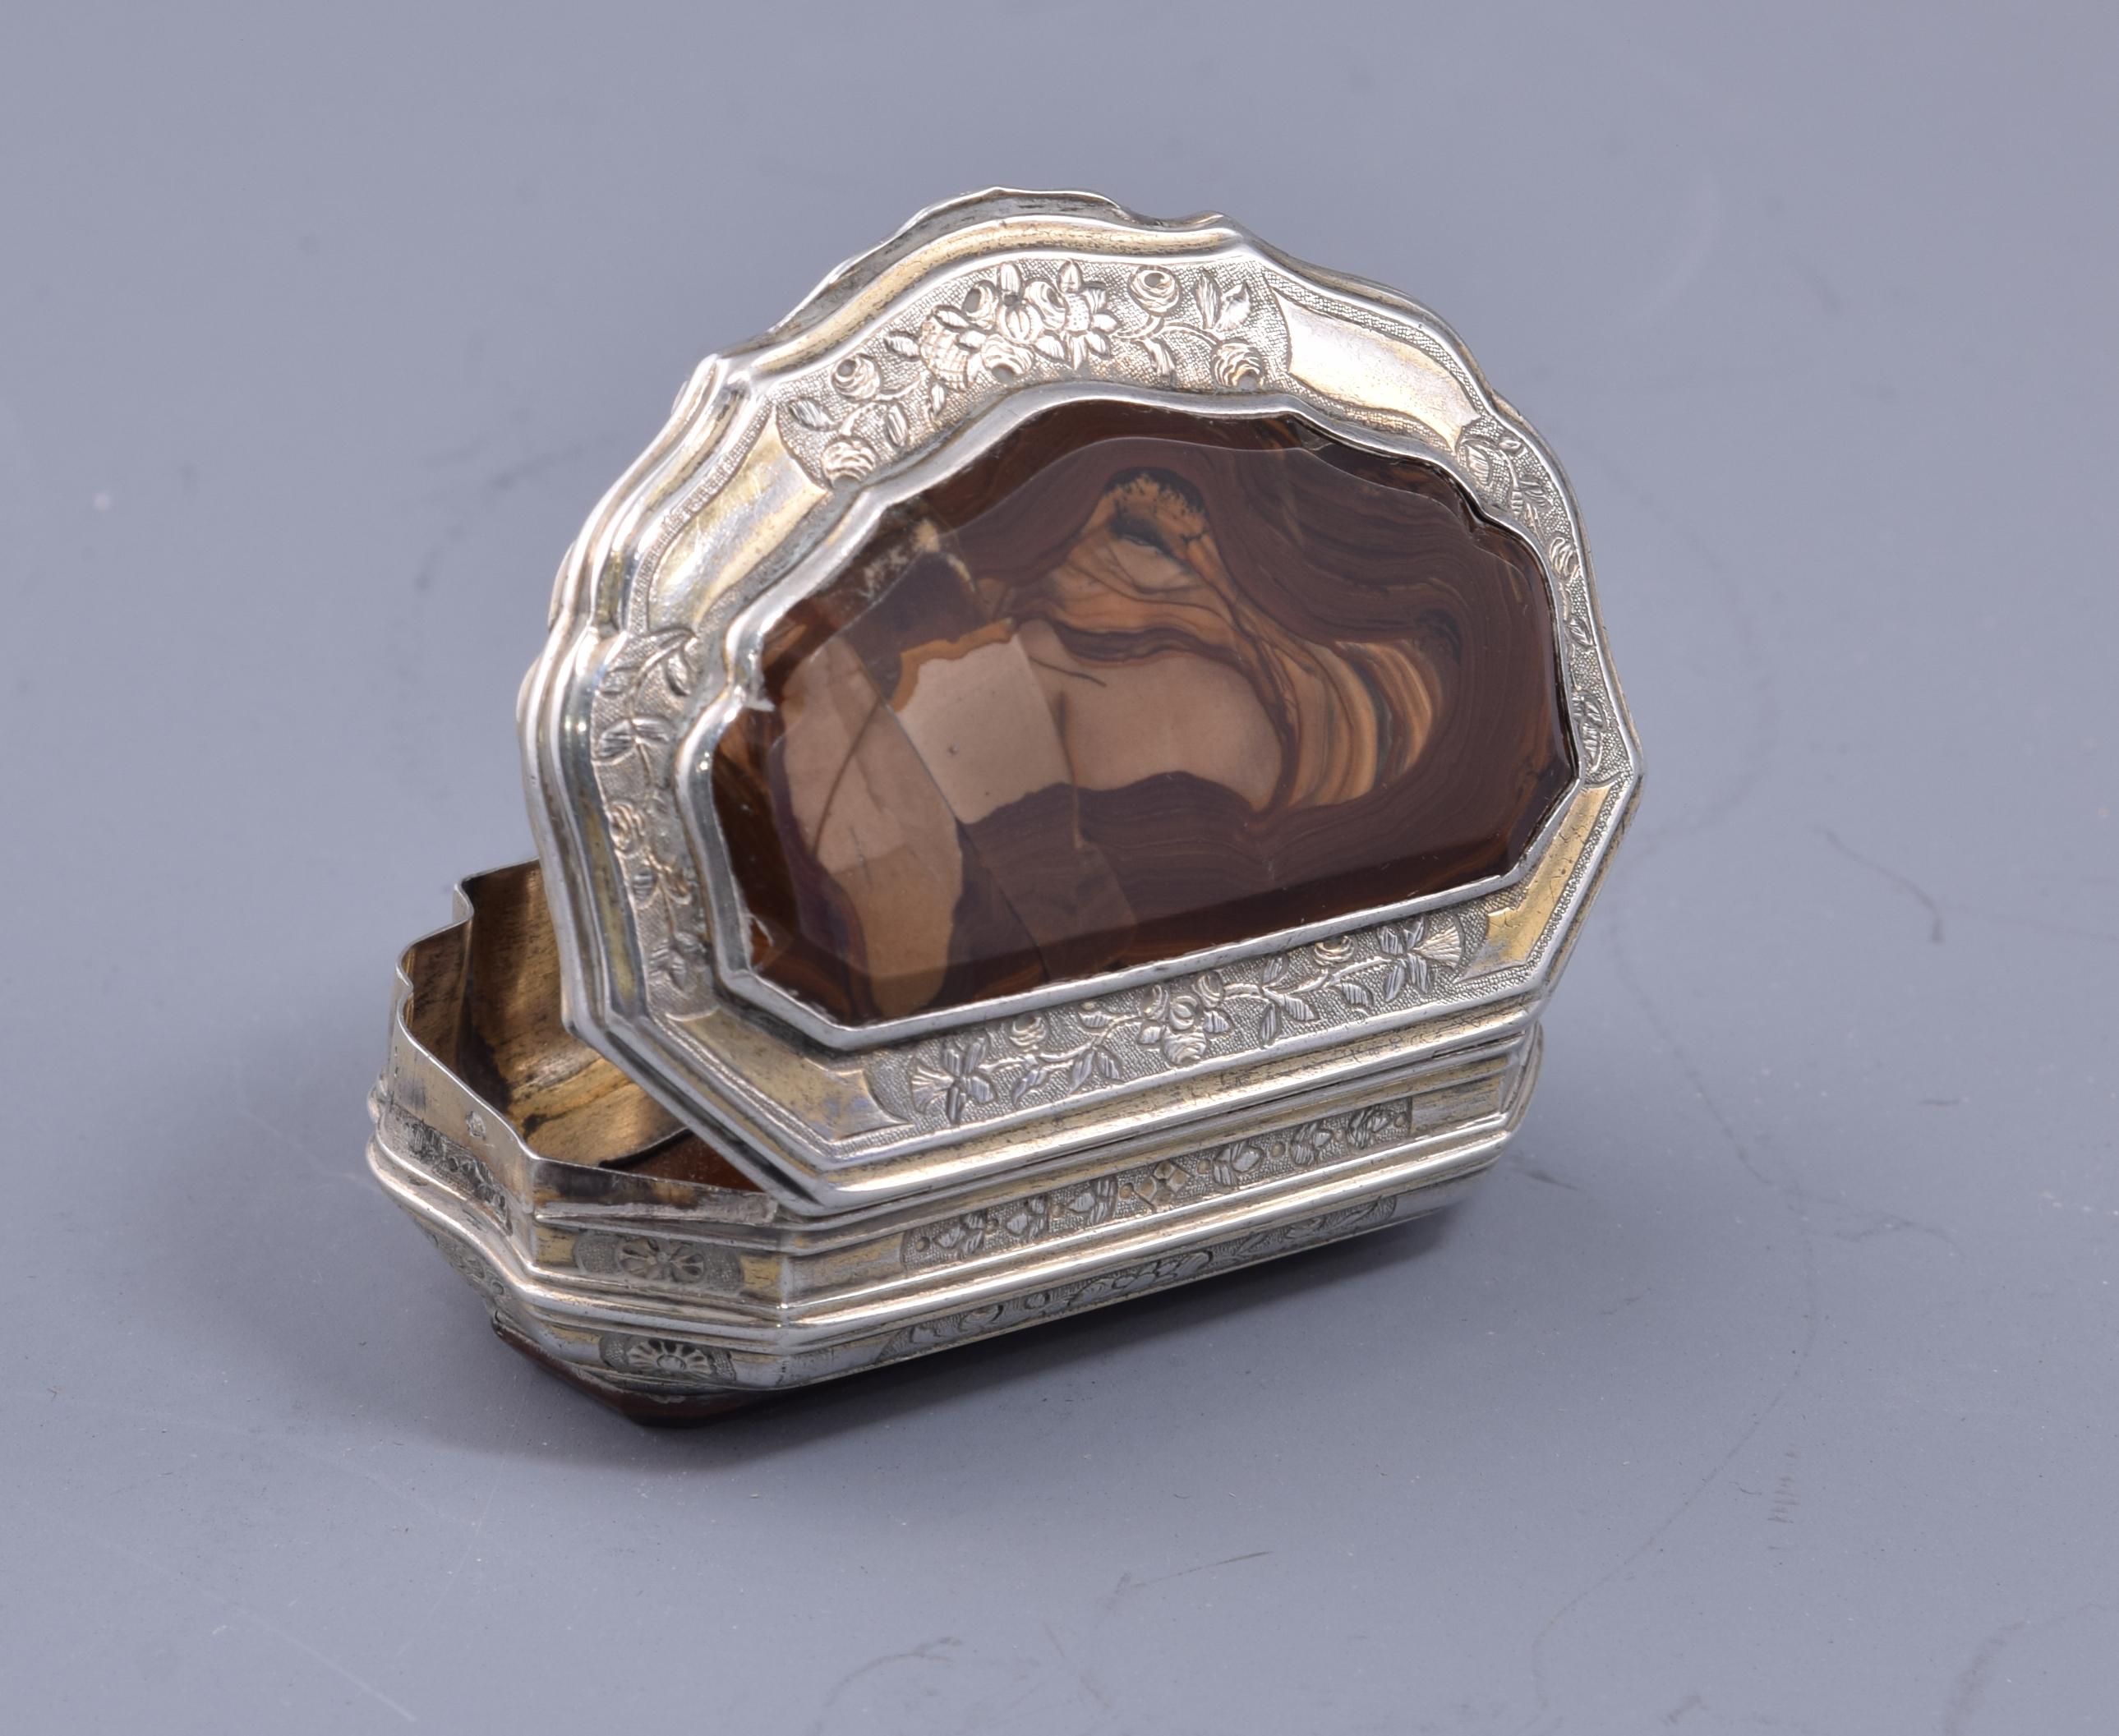 Box. Silver, agate, 19th century.
With contrast marks.
Box made of silver in its color with an elongated shape and wavy profiles decorated with two plates of agate in brown tones and vegetal elements. It maintains in some areas part of the